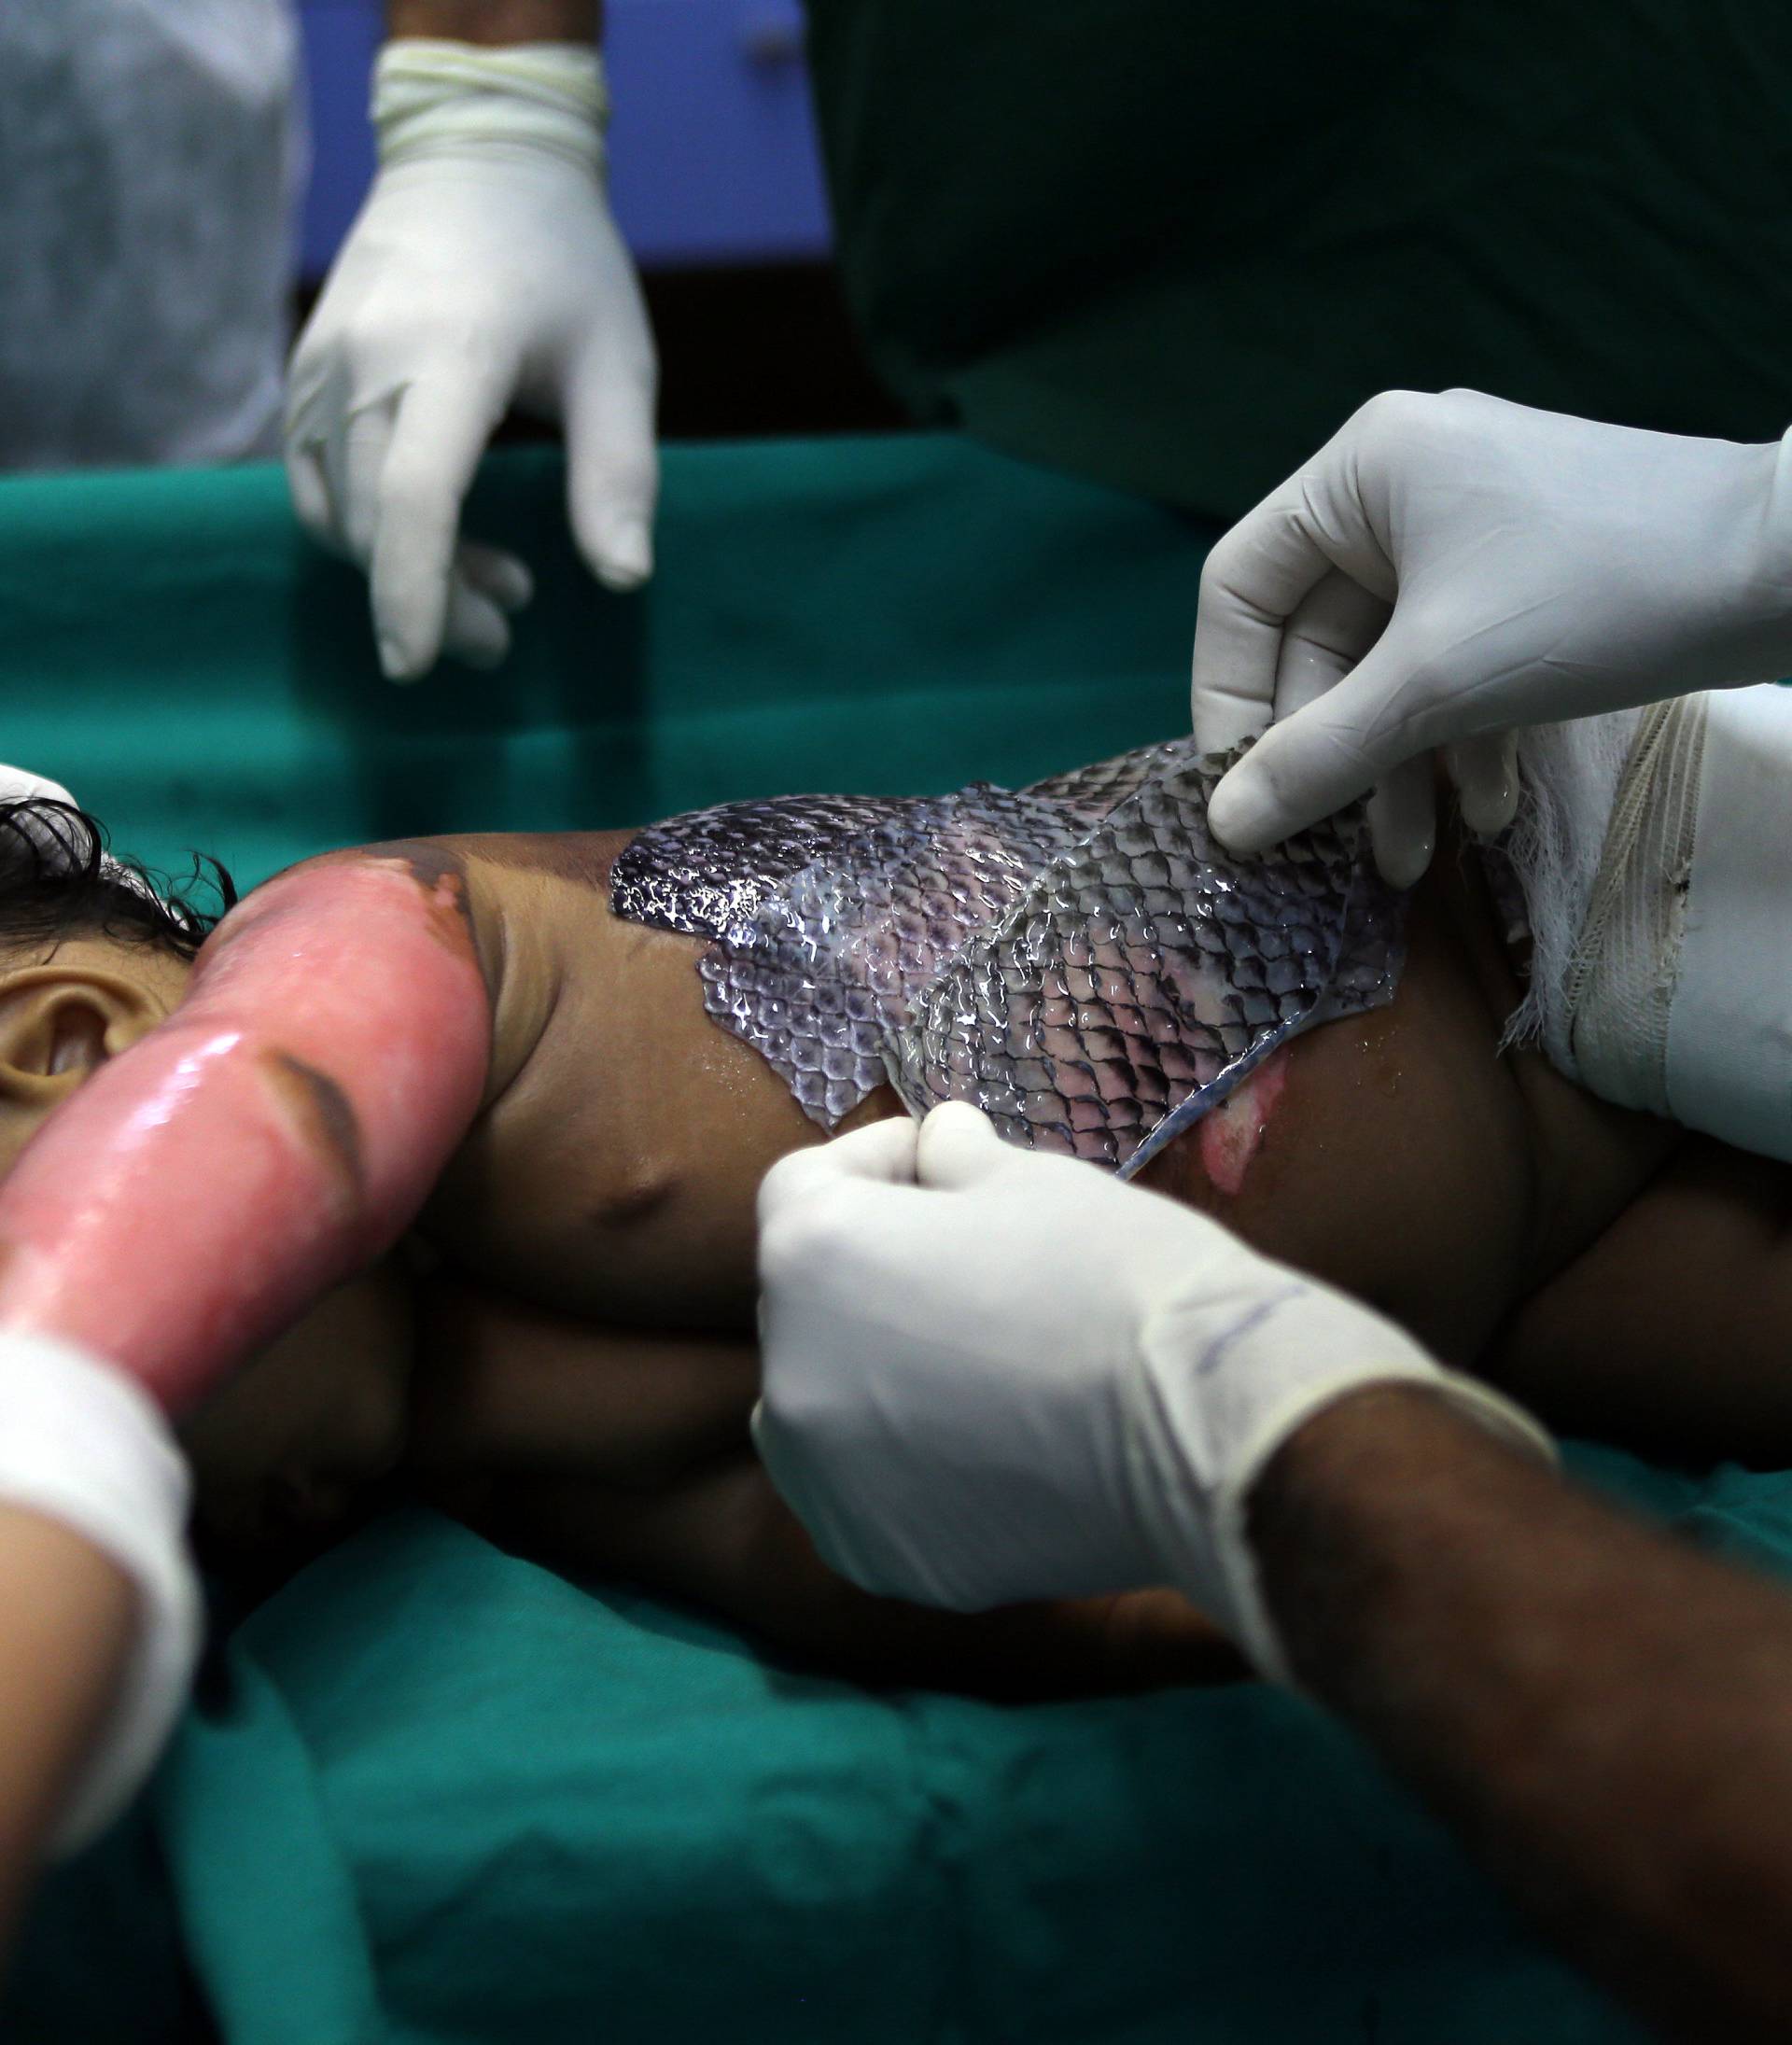 The Wider Image: Healing burns with fish skin